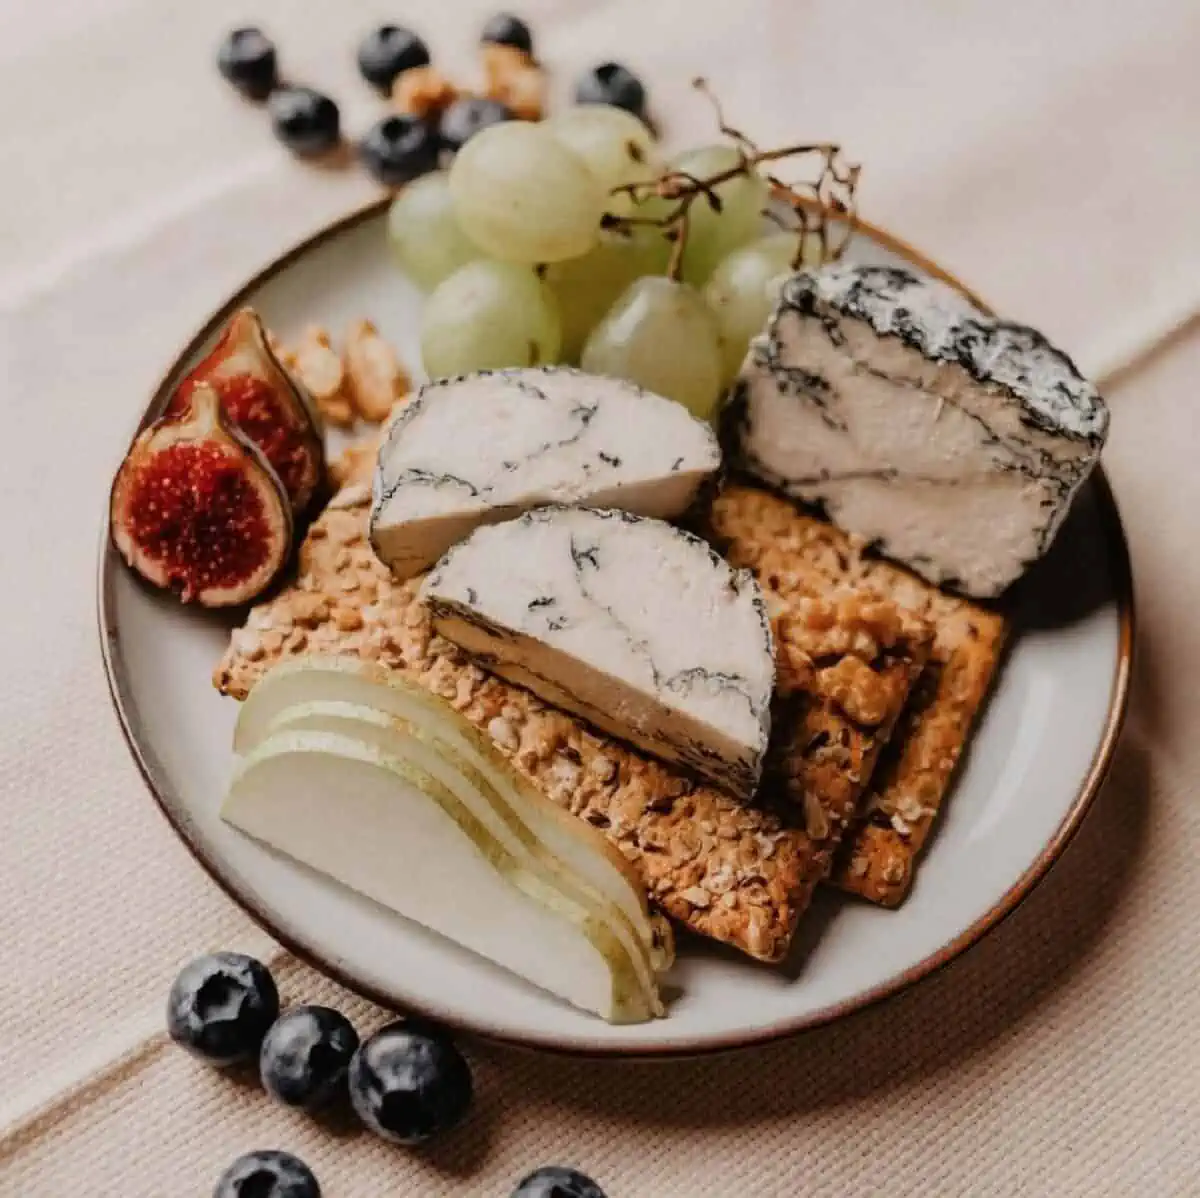 An off white plate holding chunks of Nutty Blue Cheese along with dried and fresh fruit and crackers on a beige table cloth.